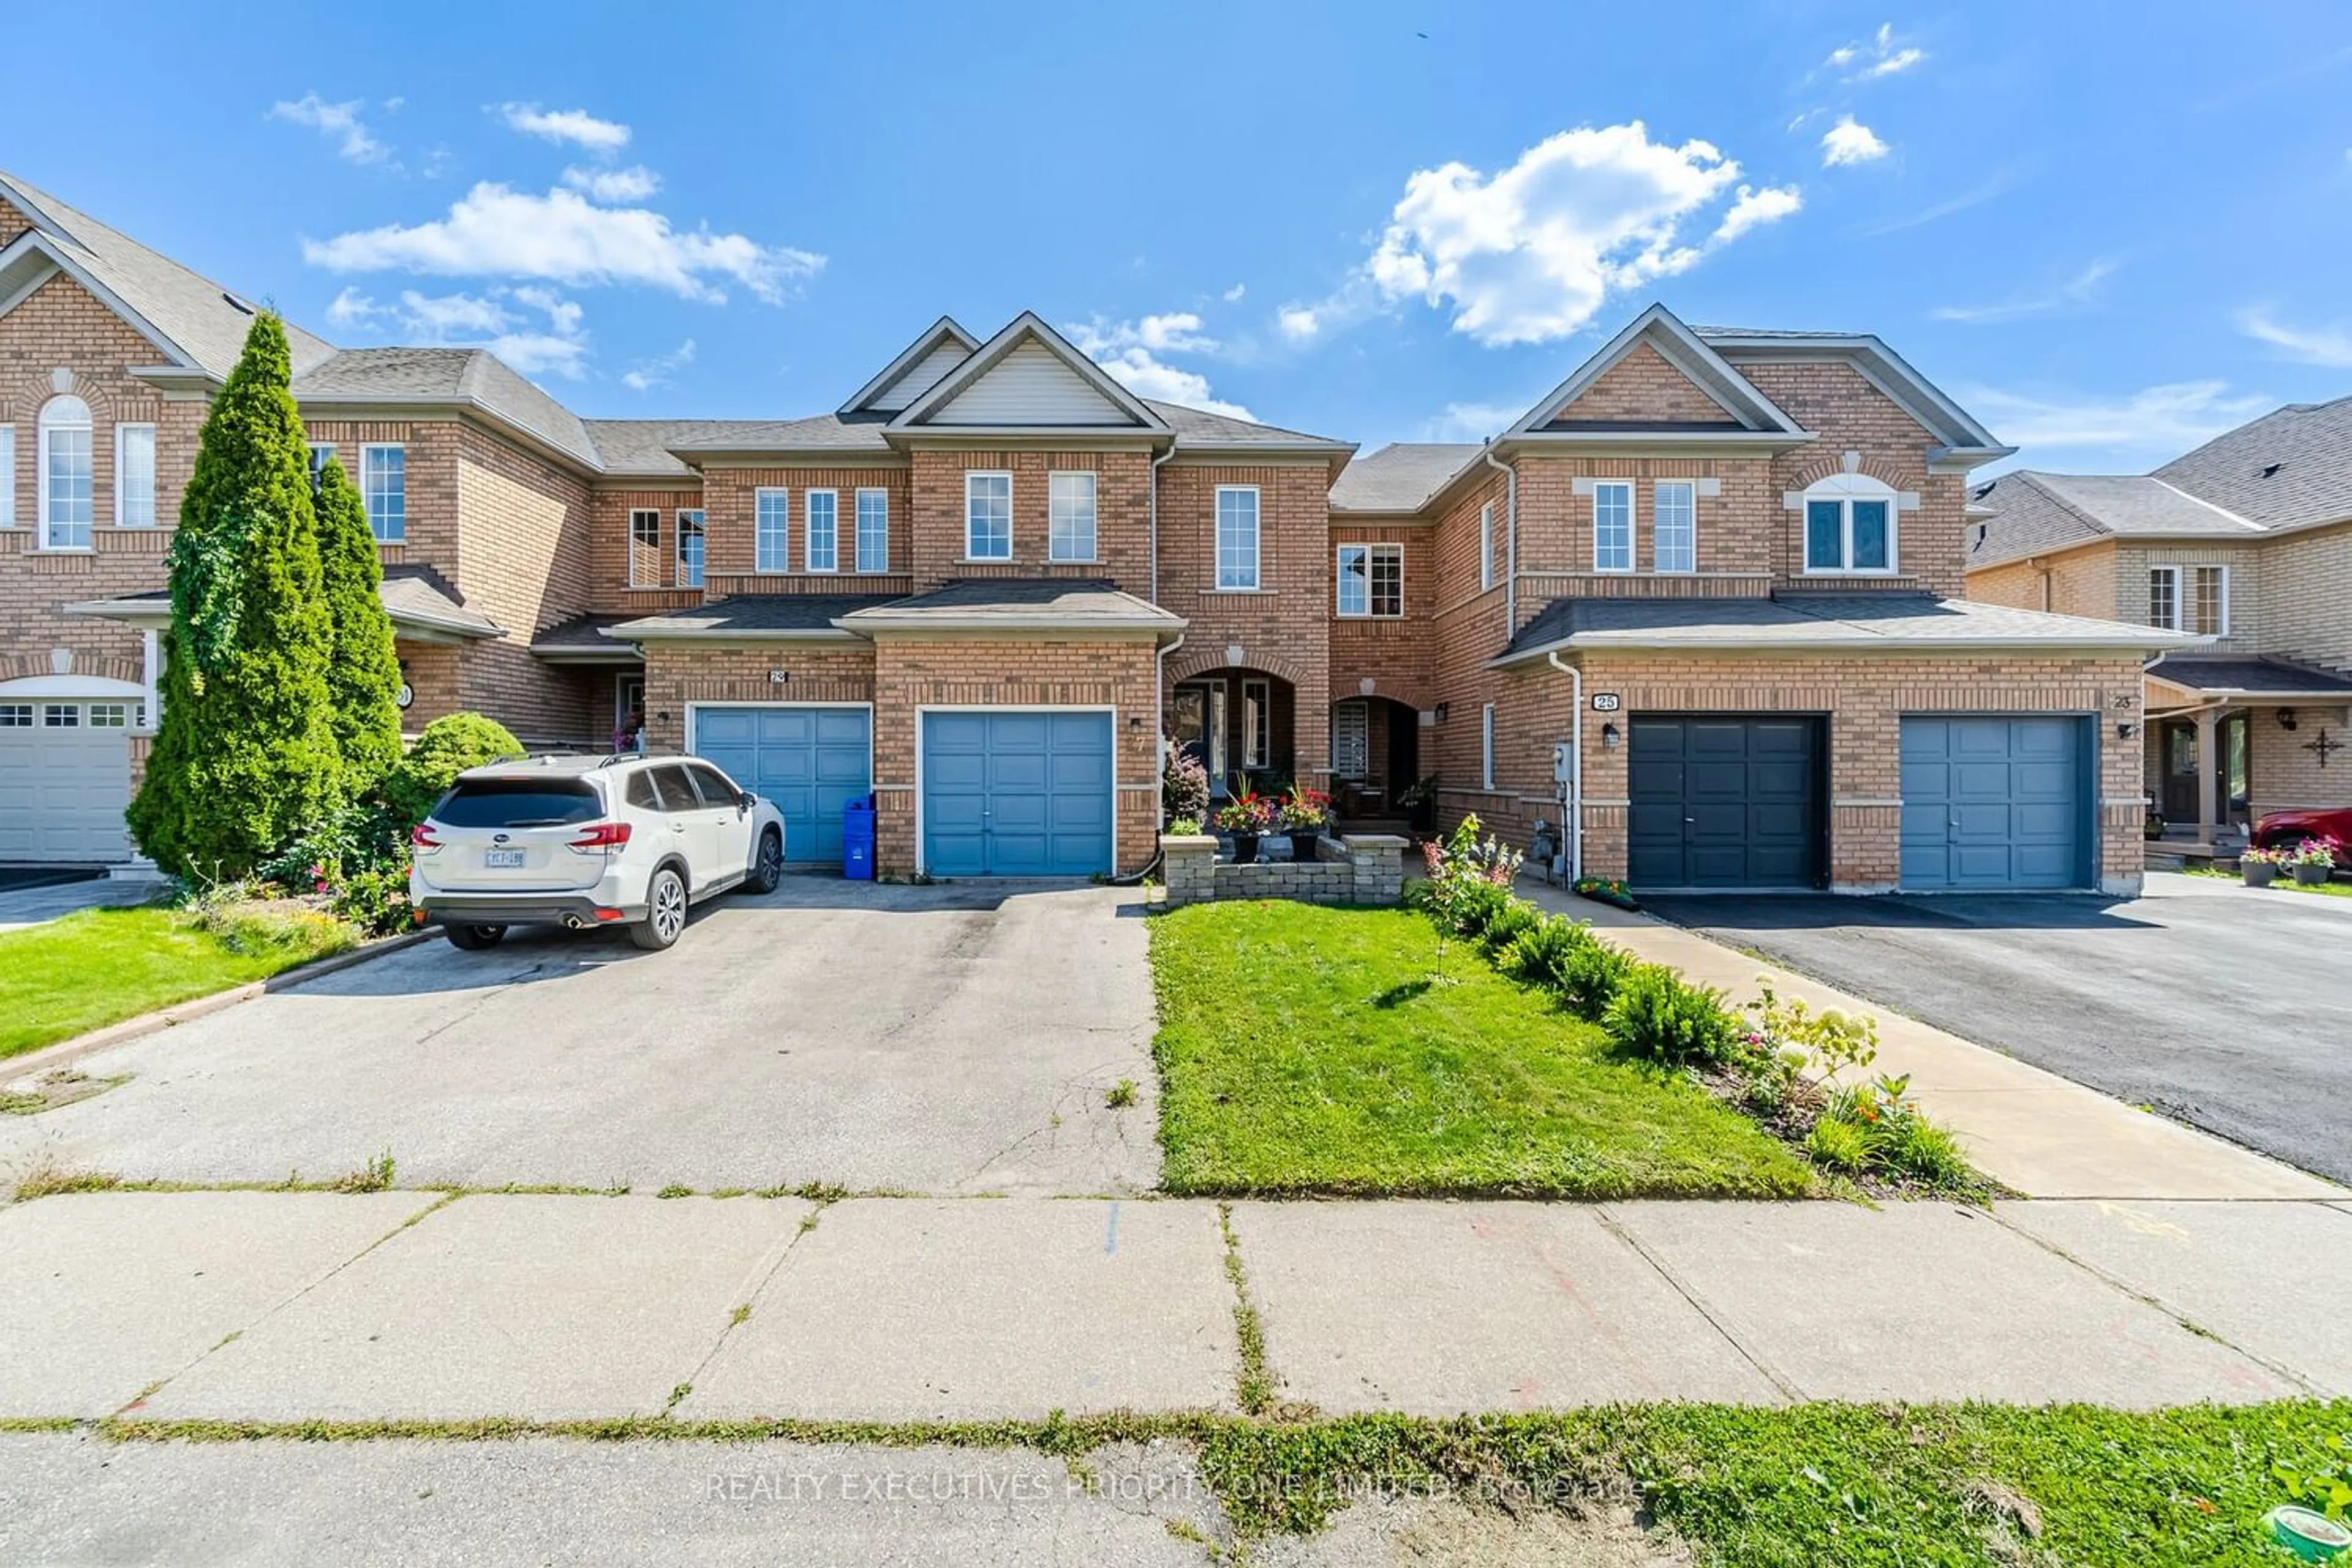 Home with brick exterior material for 27 Kinney Gate, Vaughan Ontario L6A 2S5